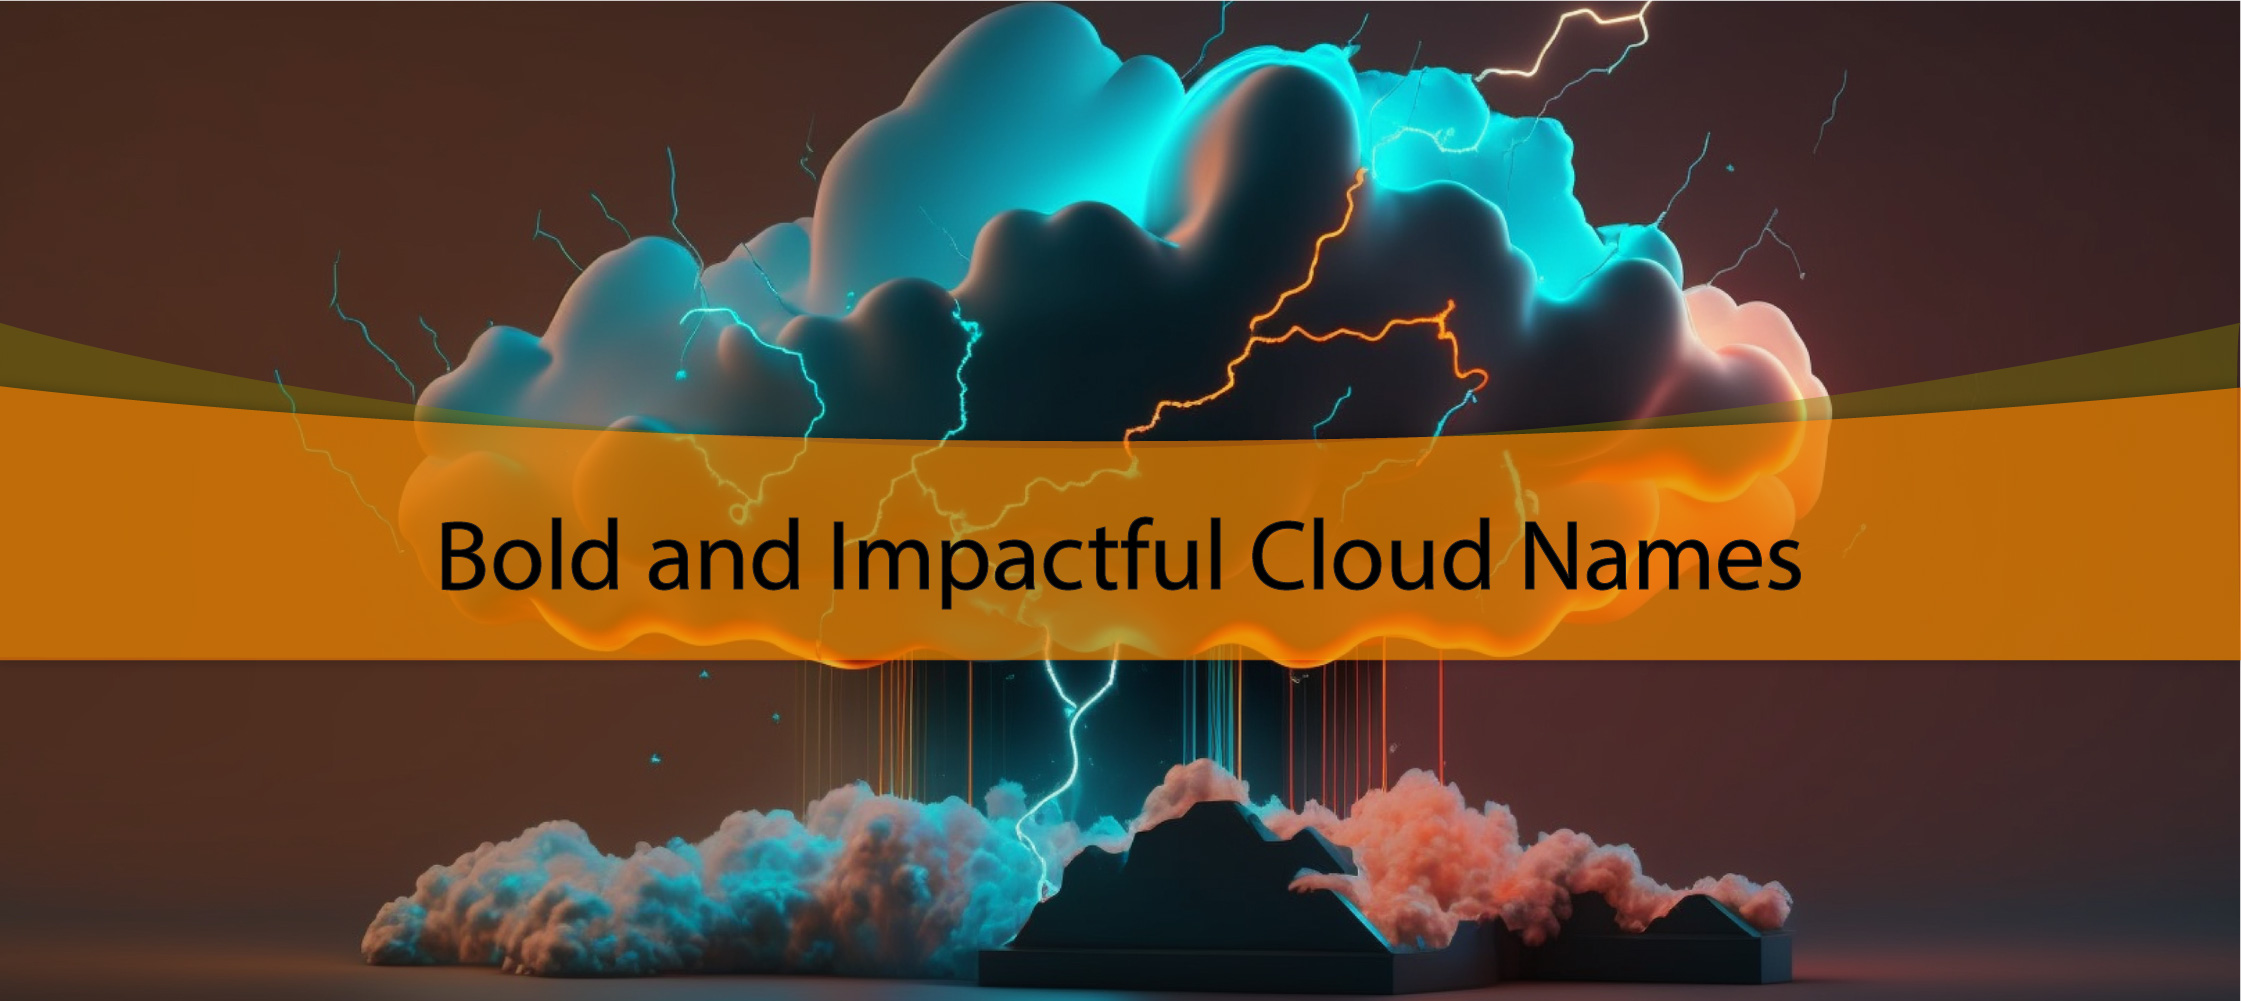 Bold and Impactful Cloud Names